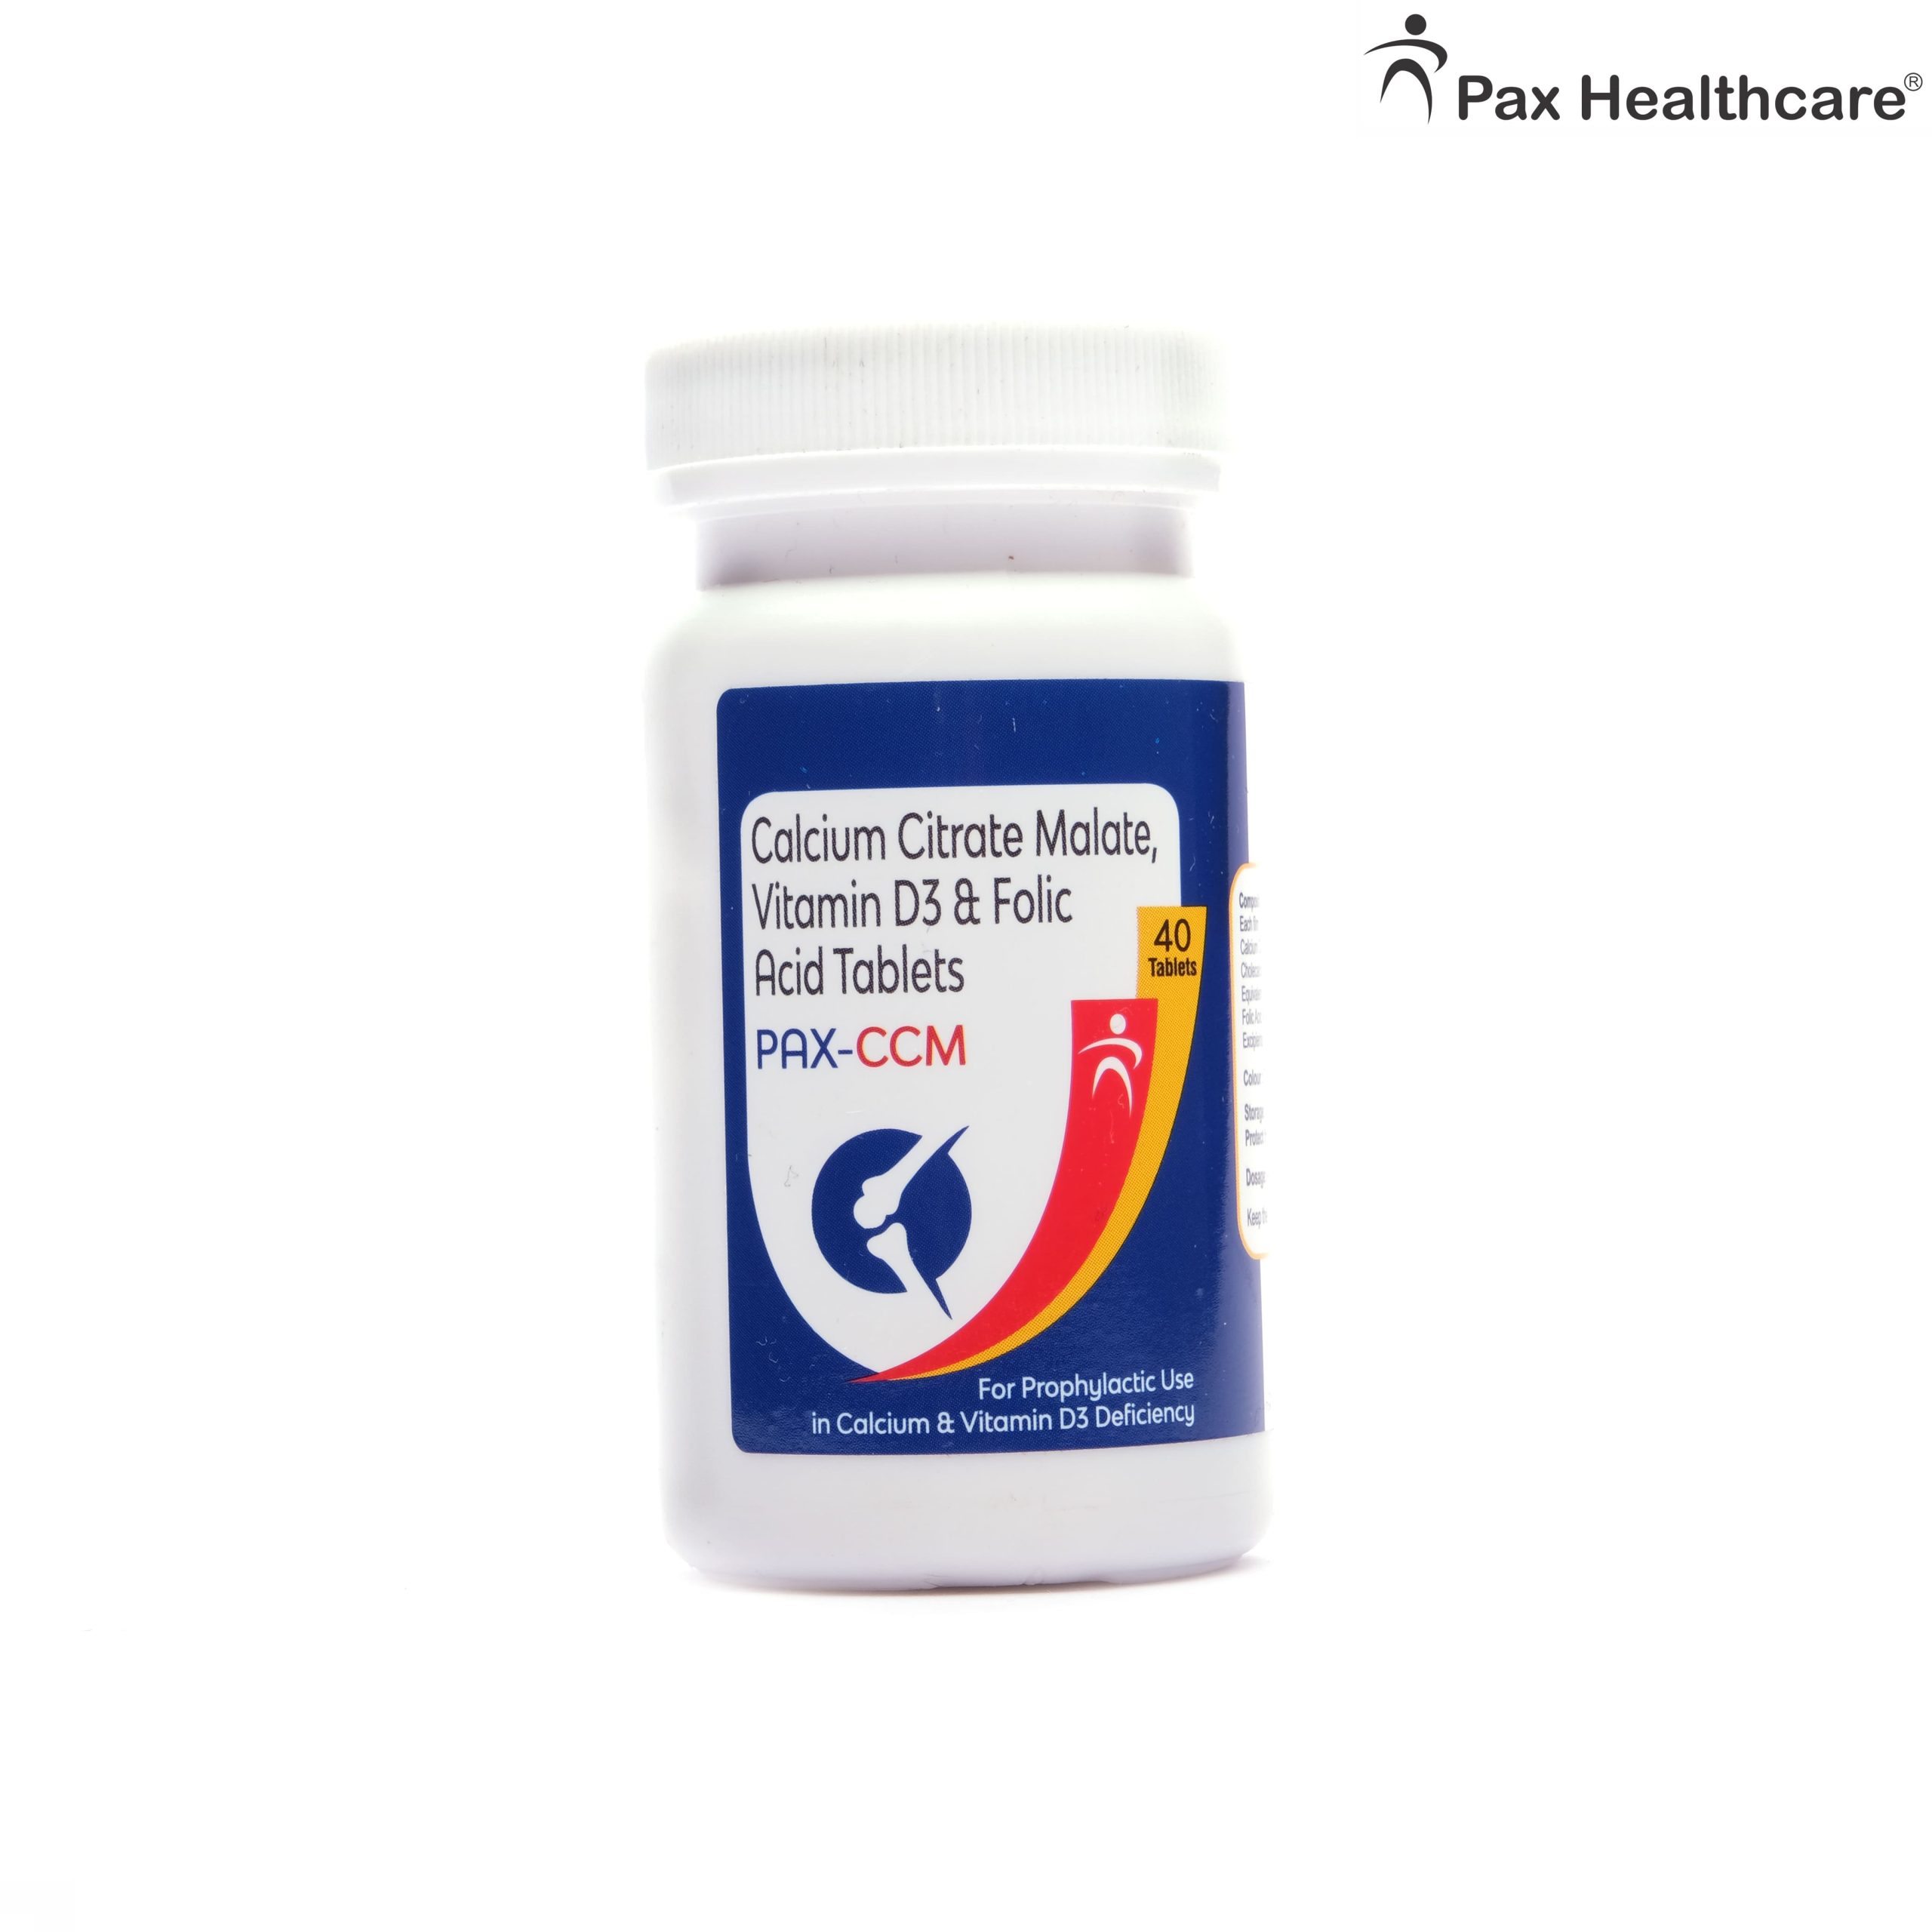 Calcium Citrate Malate, Vitamin D3 and Folic Acid Tablets